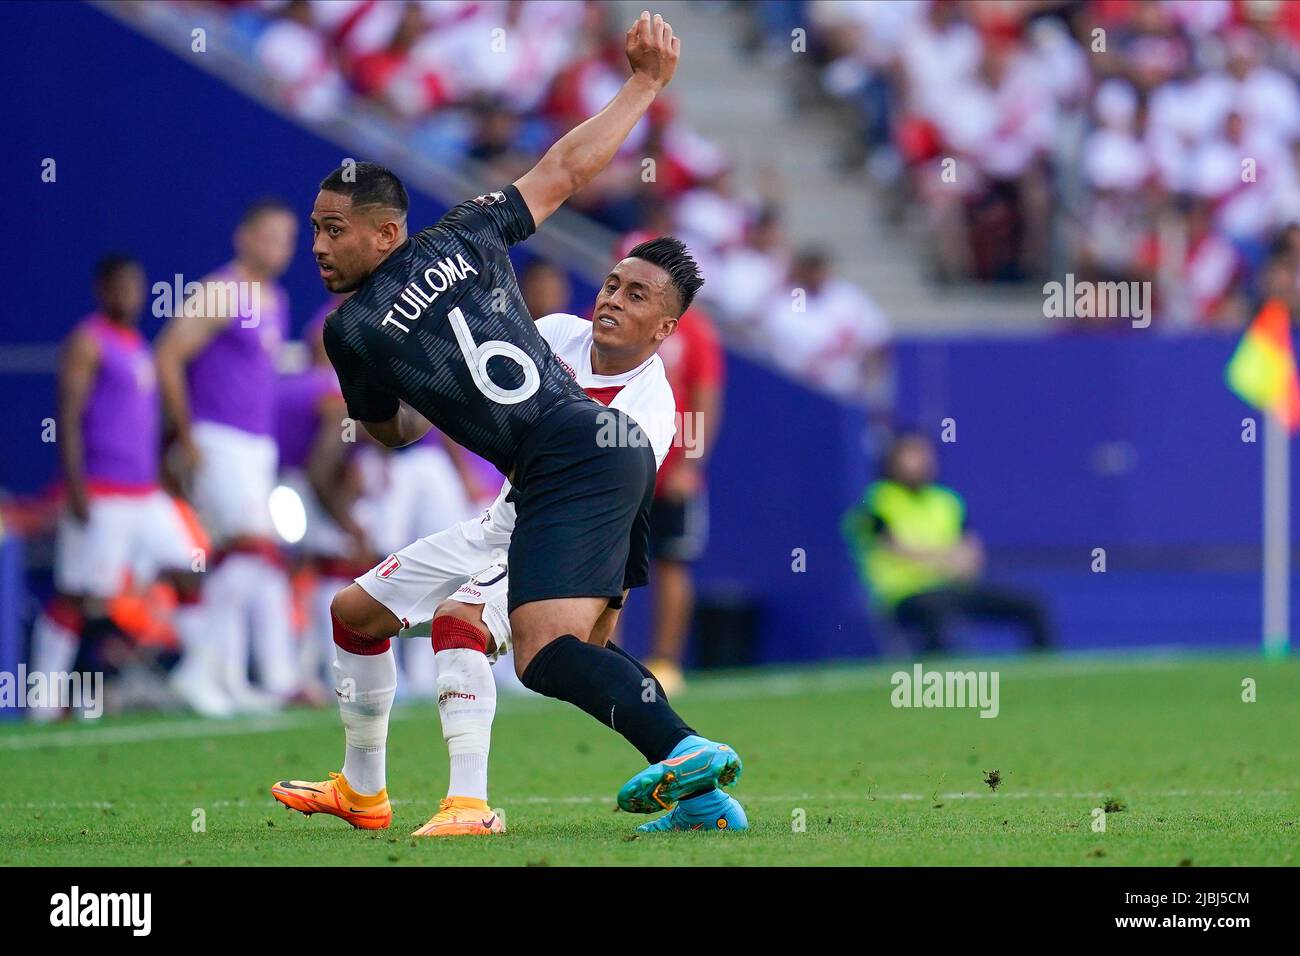 Bill Tuiloma of New Zealand during the friendly match between Peru and New Zealand played at RCDE Stadium on June 5, 2022 in Barcelona, Spain. (Photo by Bagu Blanco / PRESSINPHOTO) Stock Photo